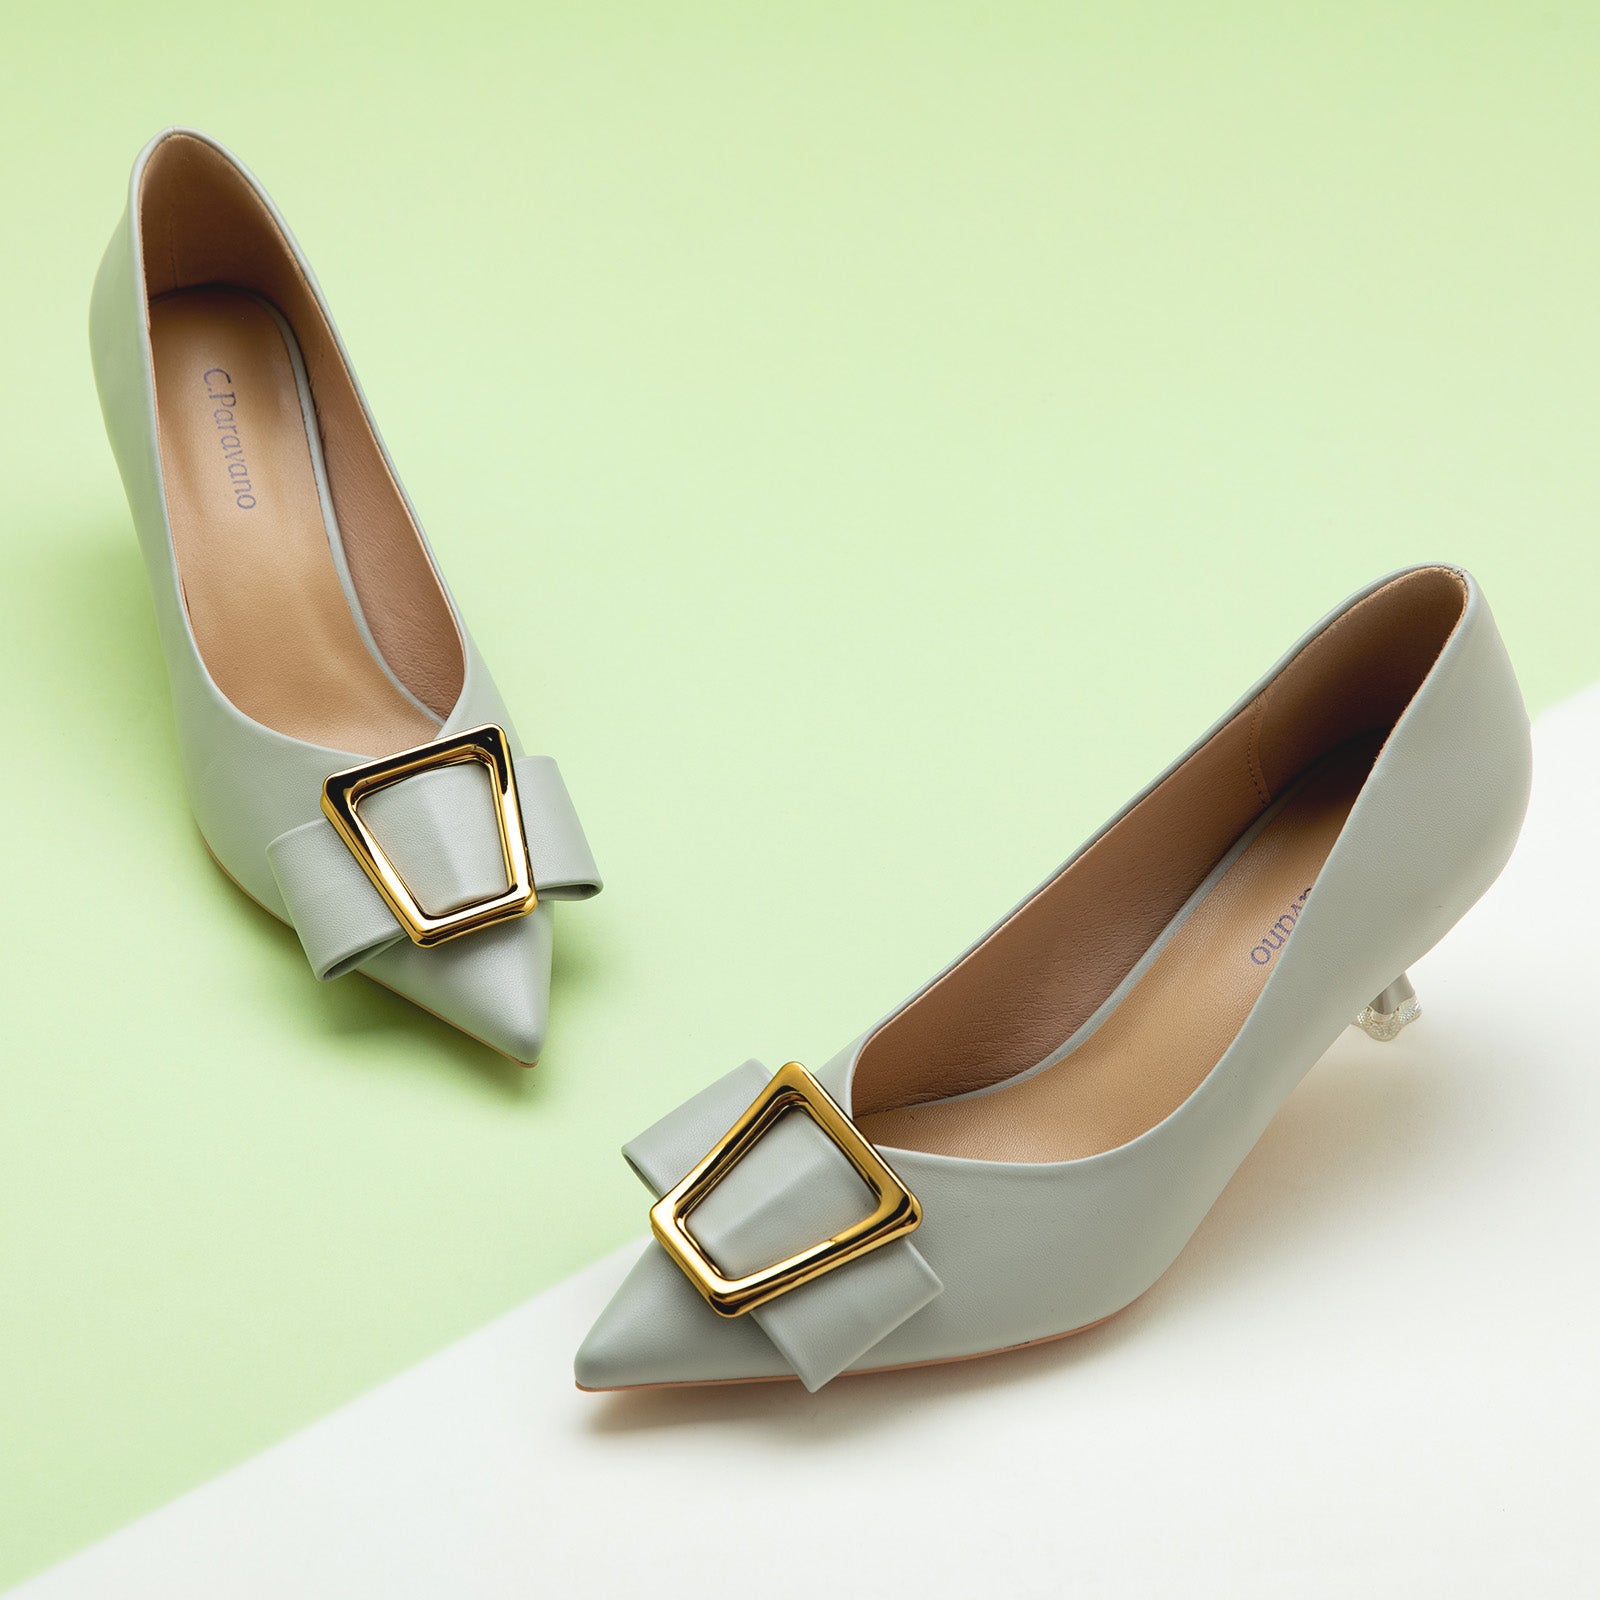 Grey Geometric Kitten Heel Women Pumps, a versatile and sophisticated choice for a neutral and stylish look